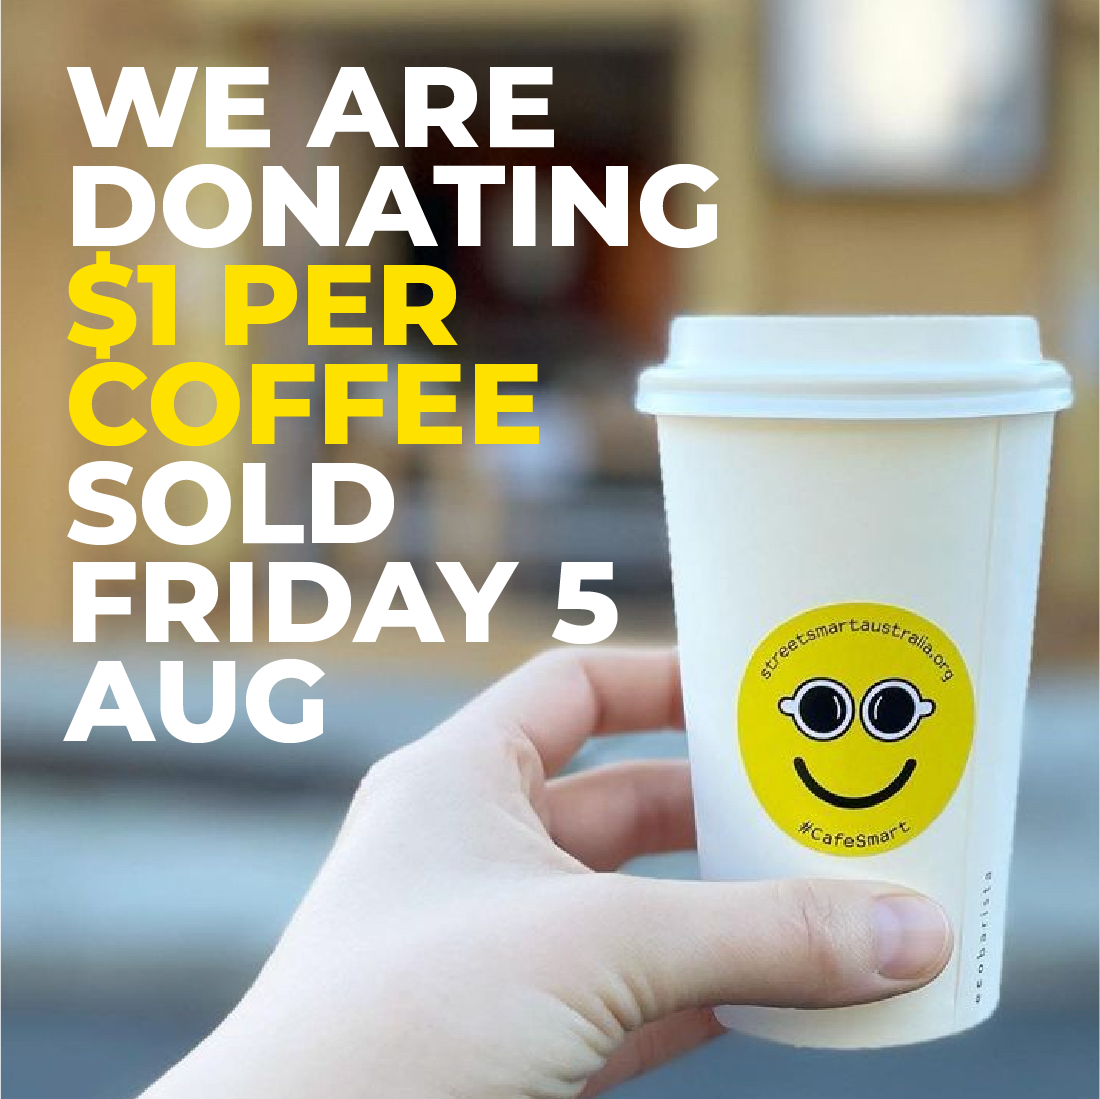 Help Us Support CafeSmart this August!